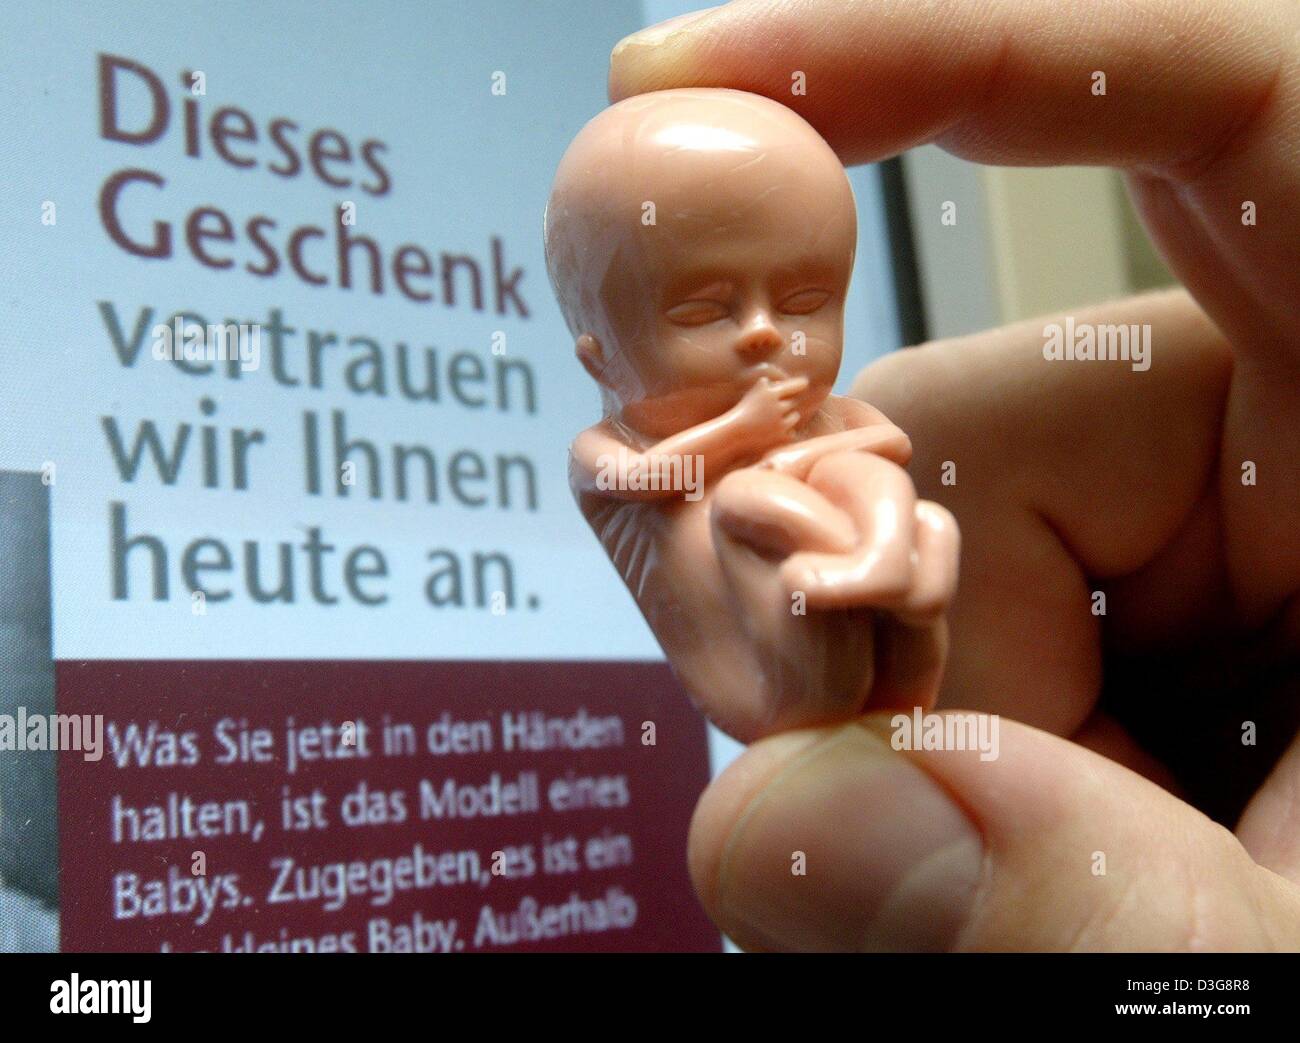 (dpa) - A plastic embryo in the tenth week of pregnancy is presented at the Catholic 'Durchblick' club in Bruchsal, Germany, 15 October 2003. The computer screen in the background shows a part of the brochure with which the club wants to protest against abortion. The text reads: 'This present we entrust to you today. - What you are now holding in your hand, is the model of a baby.  Stock Photo